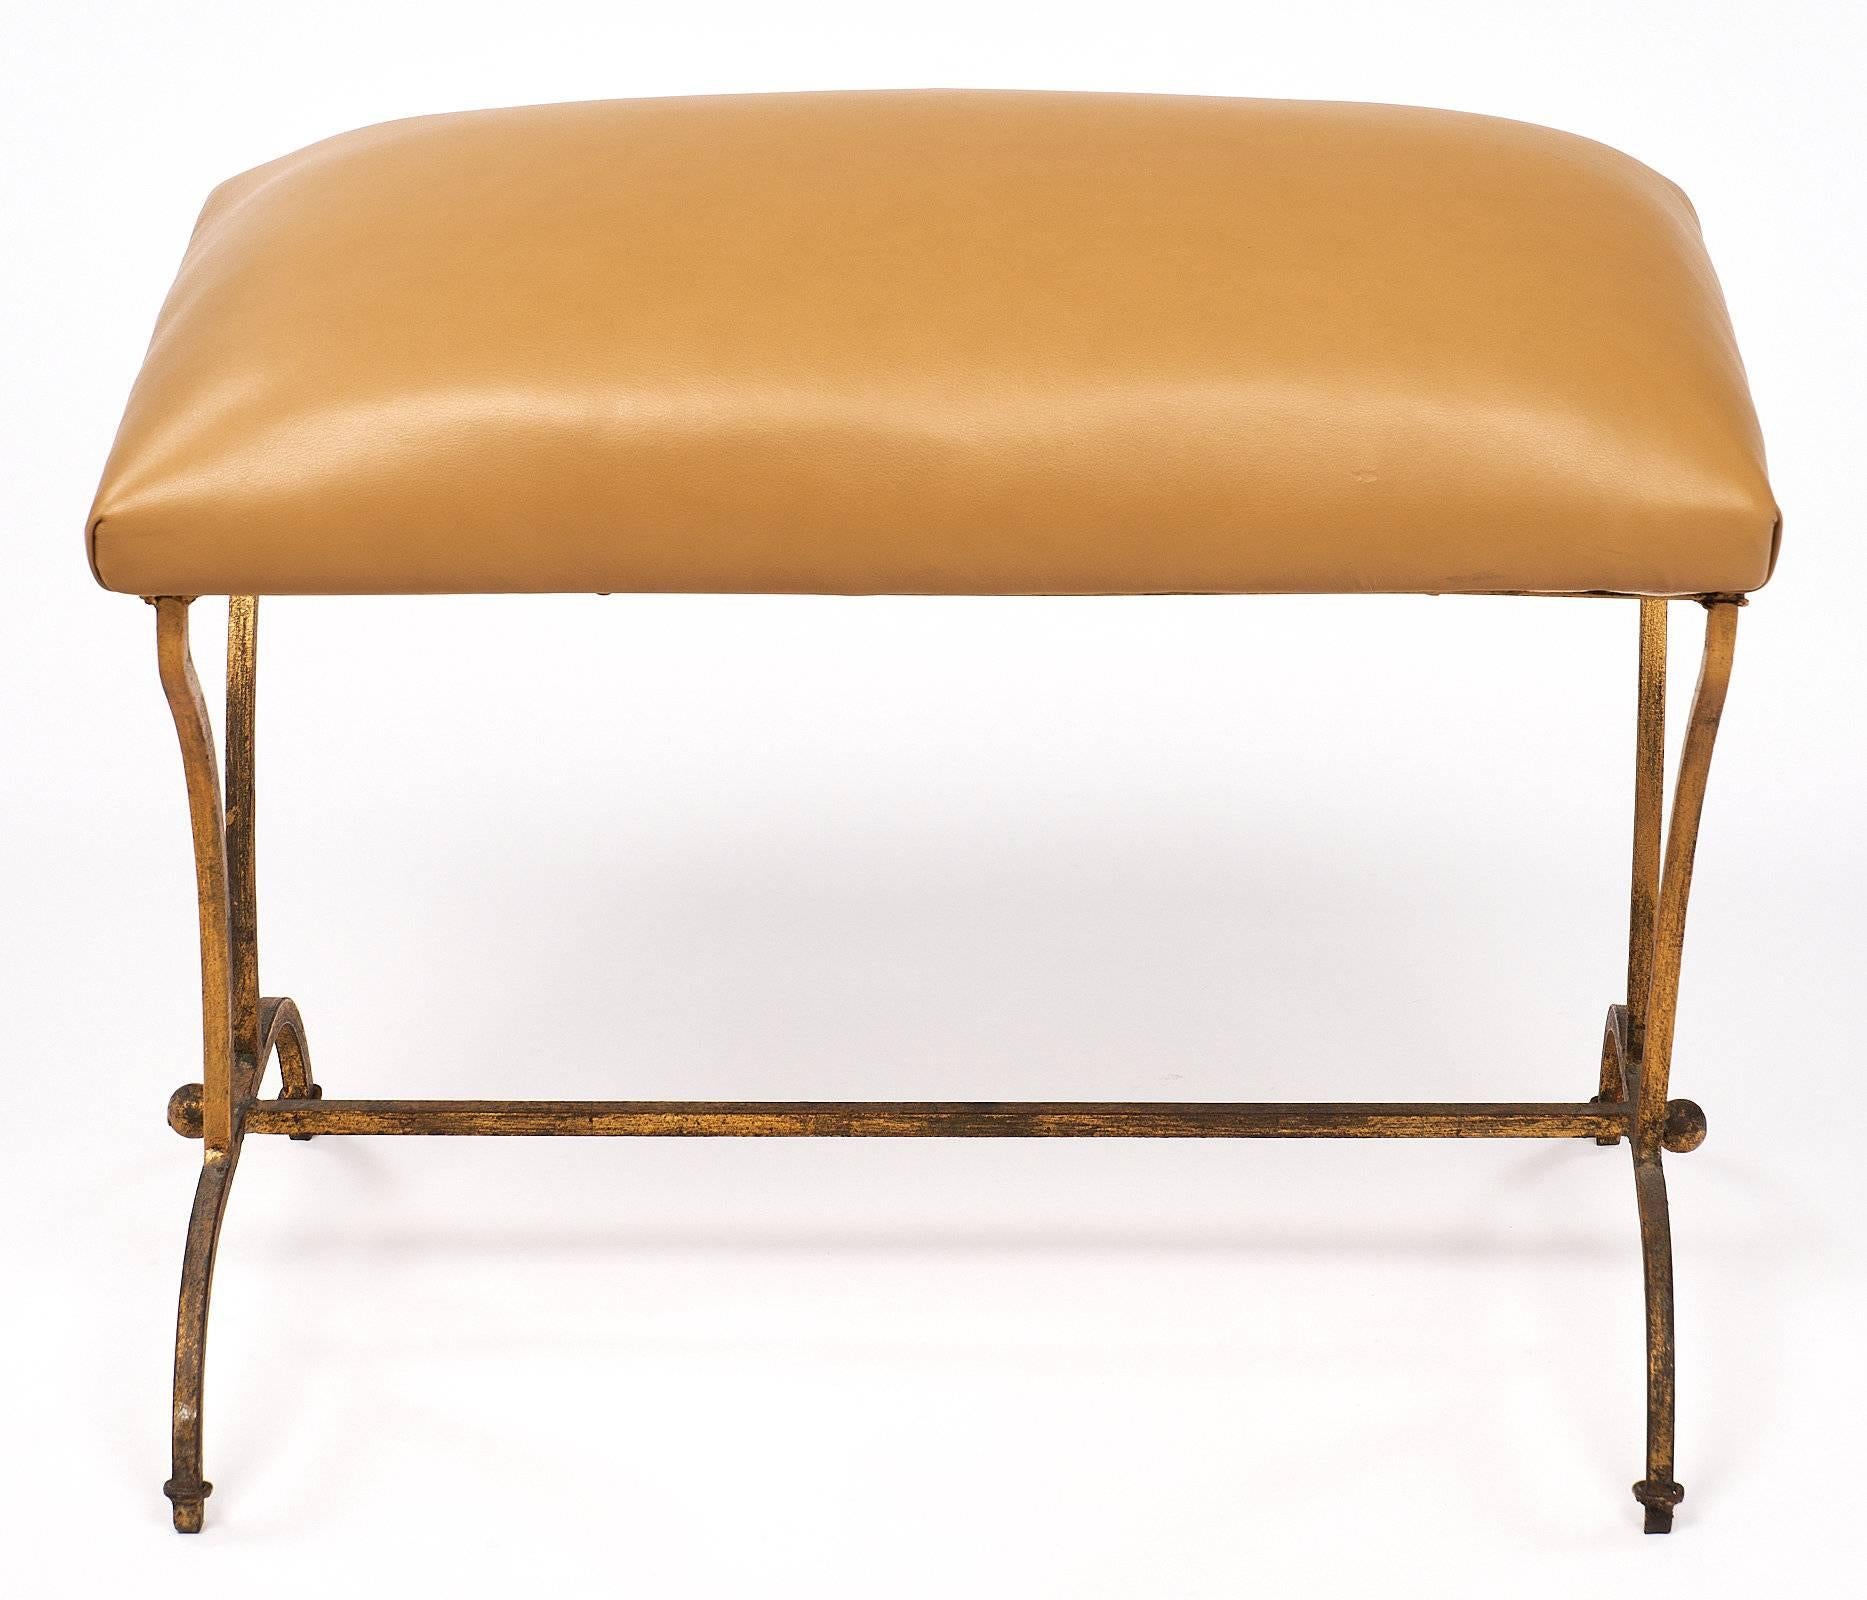 Art Deco period Spanish bench of forged iron finished with gold leaf. The cushioned seat is upholstered in a golden colored cow hide leather. A charming piece suitable for any interior.